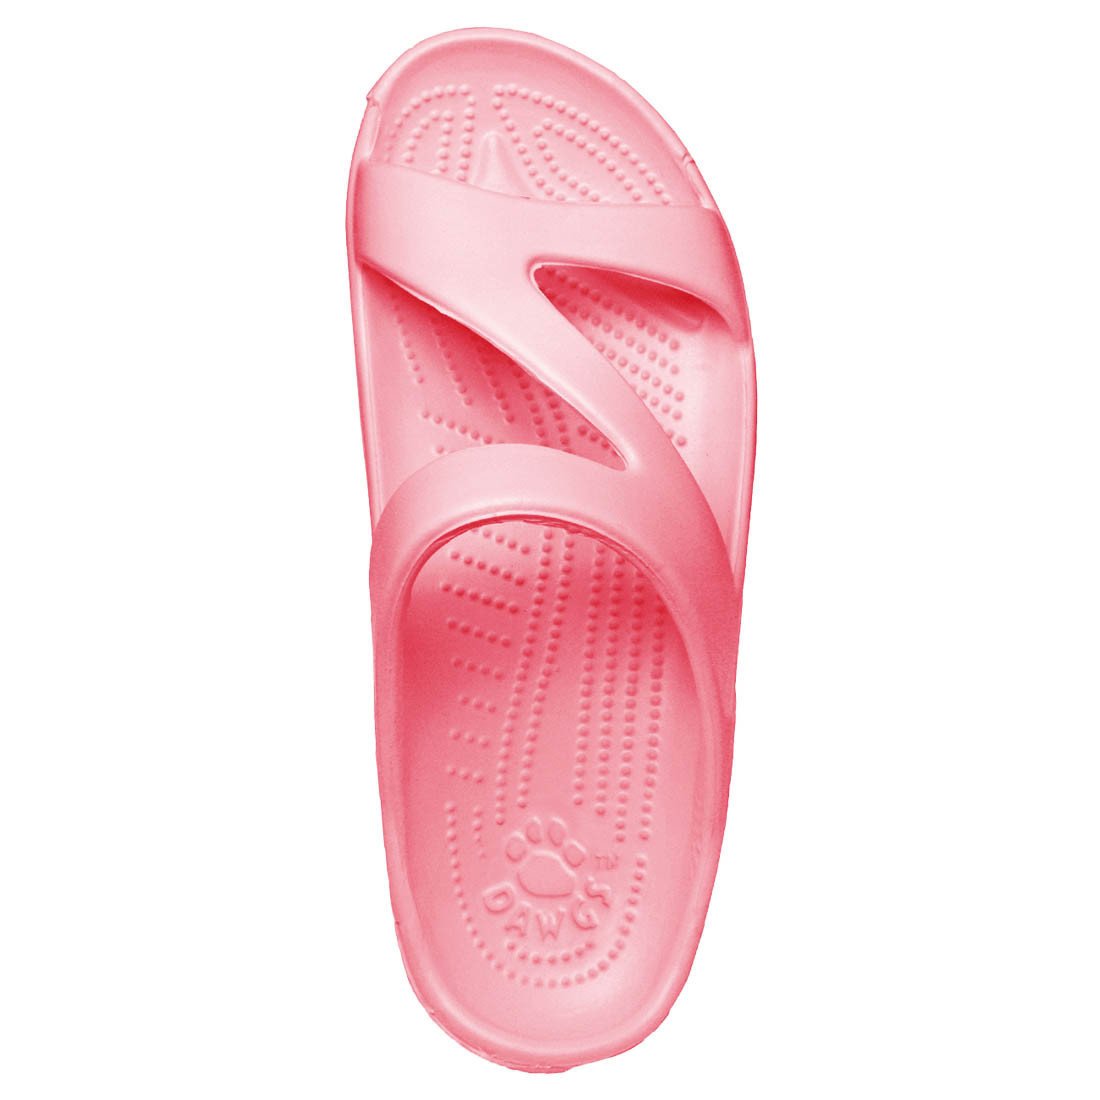 Women's Z Sandals - Soft Pink by DAWGS USA